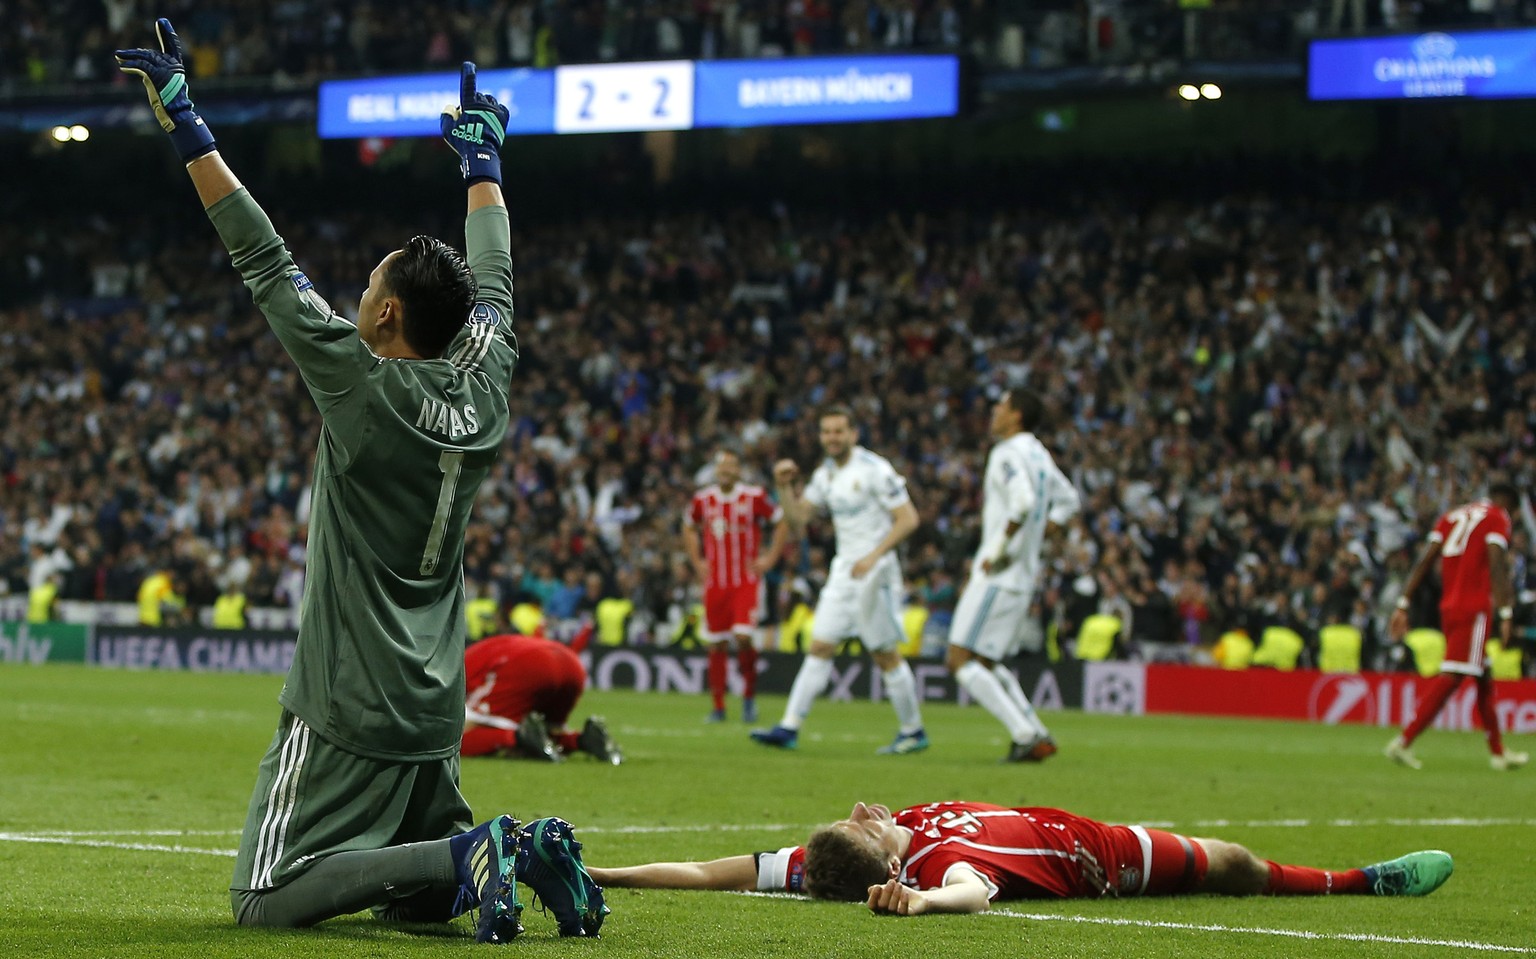 Real Madrid&#039;s goalkeeper Keylor Navas celebrates after Madrid reached its third straight Champions League final 4-3 on aggregate at the Champions League semifinal second leg soccer match between  ...